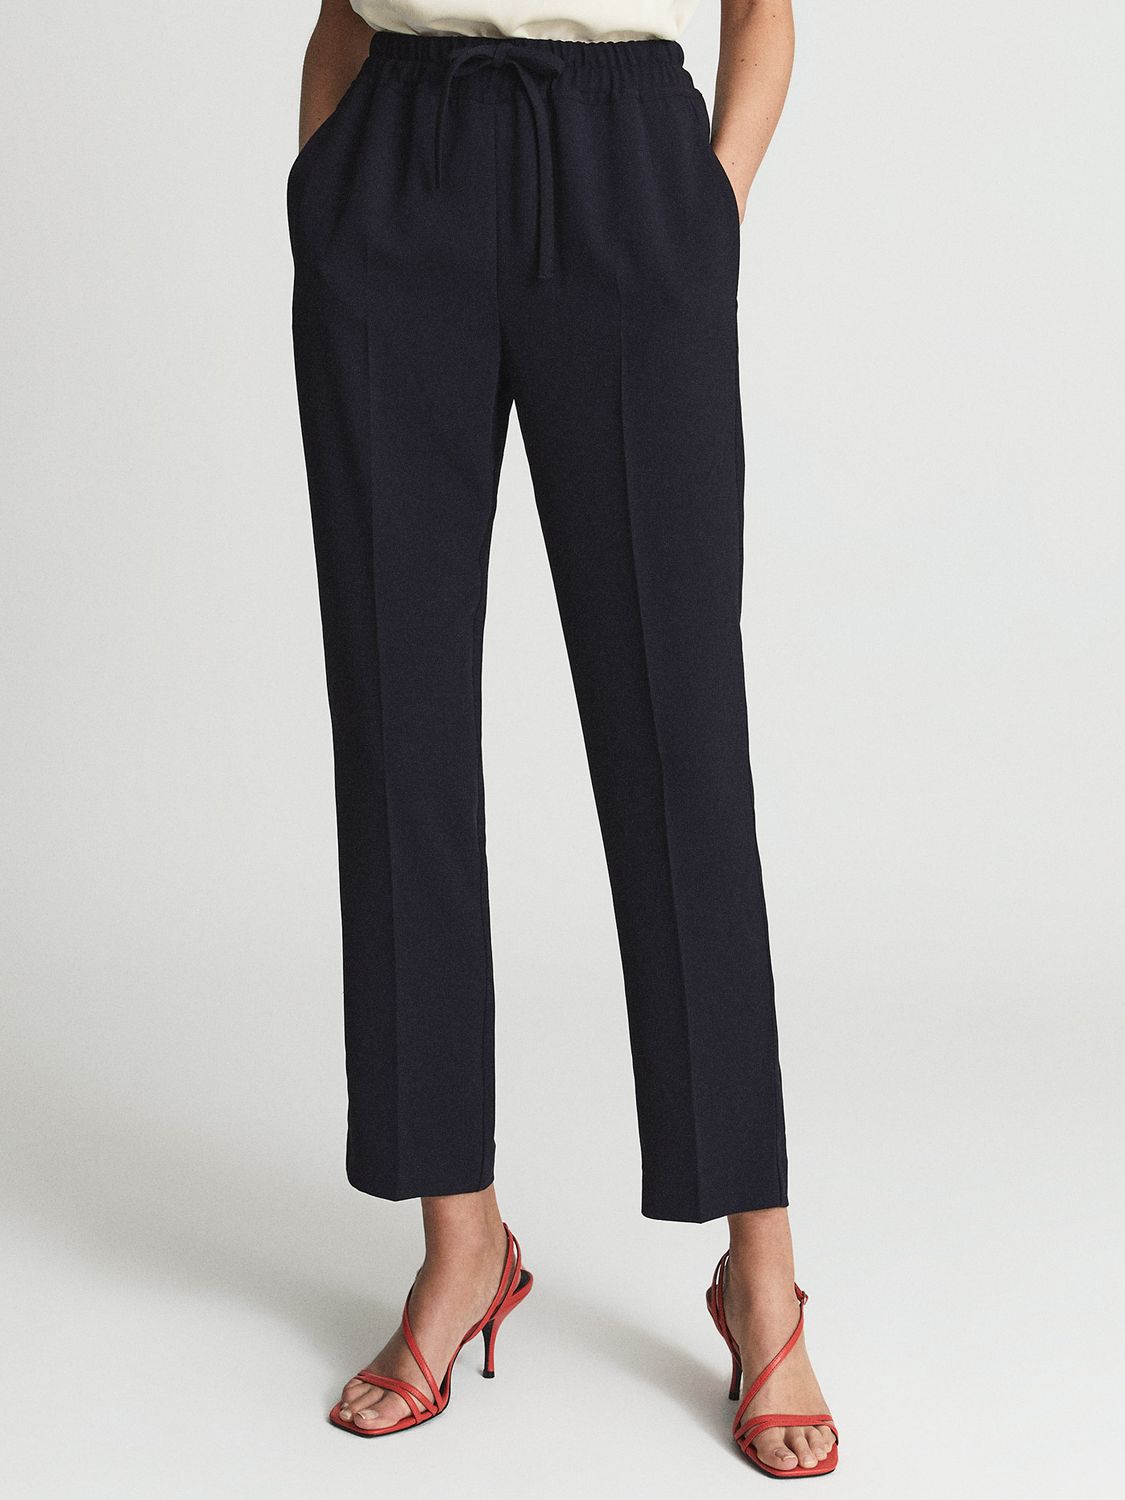 Reiss Hailey Cropped Trousers, Navy at John Lewis & Partners